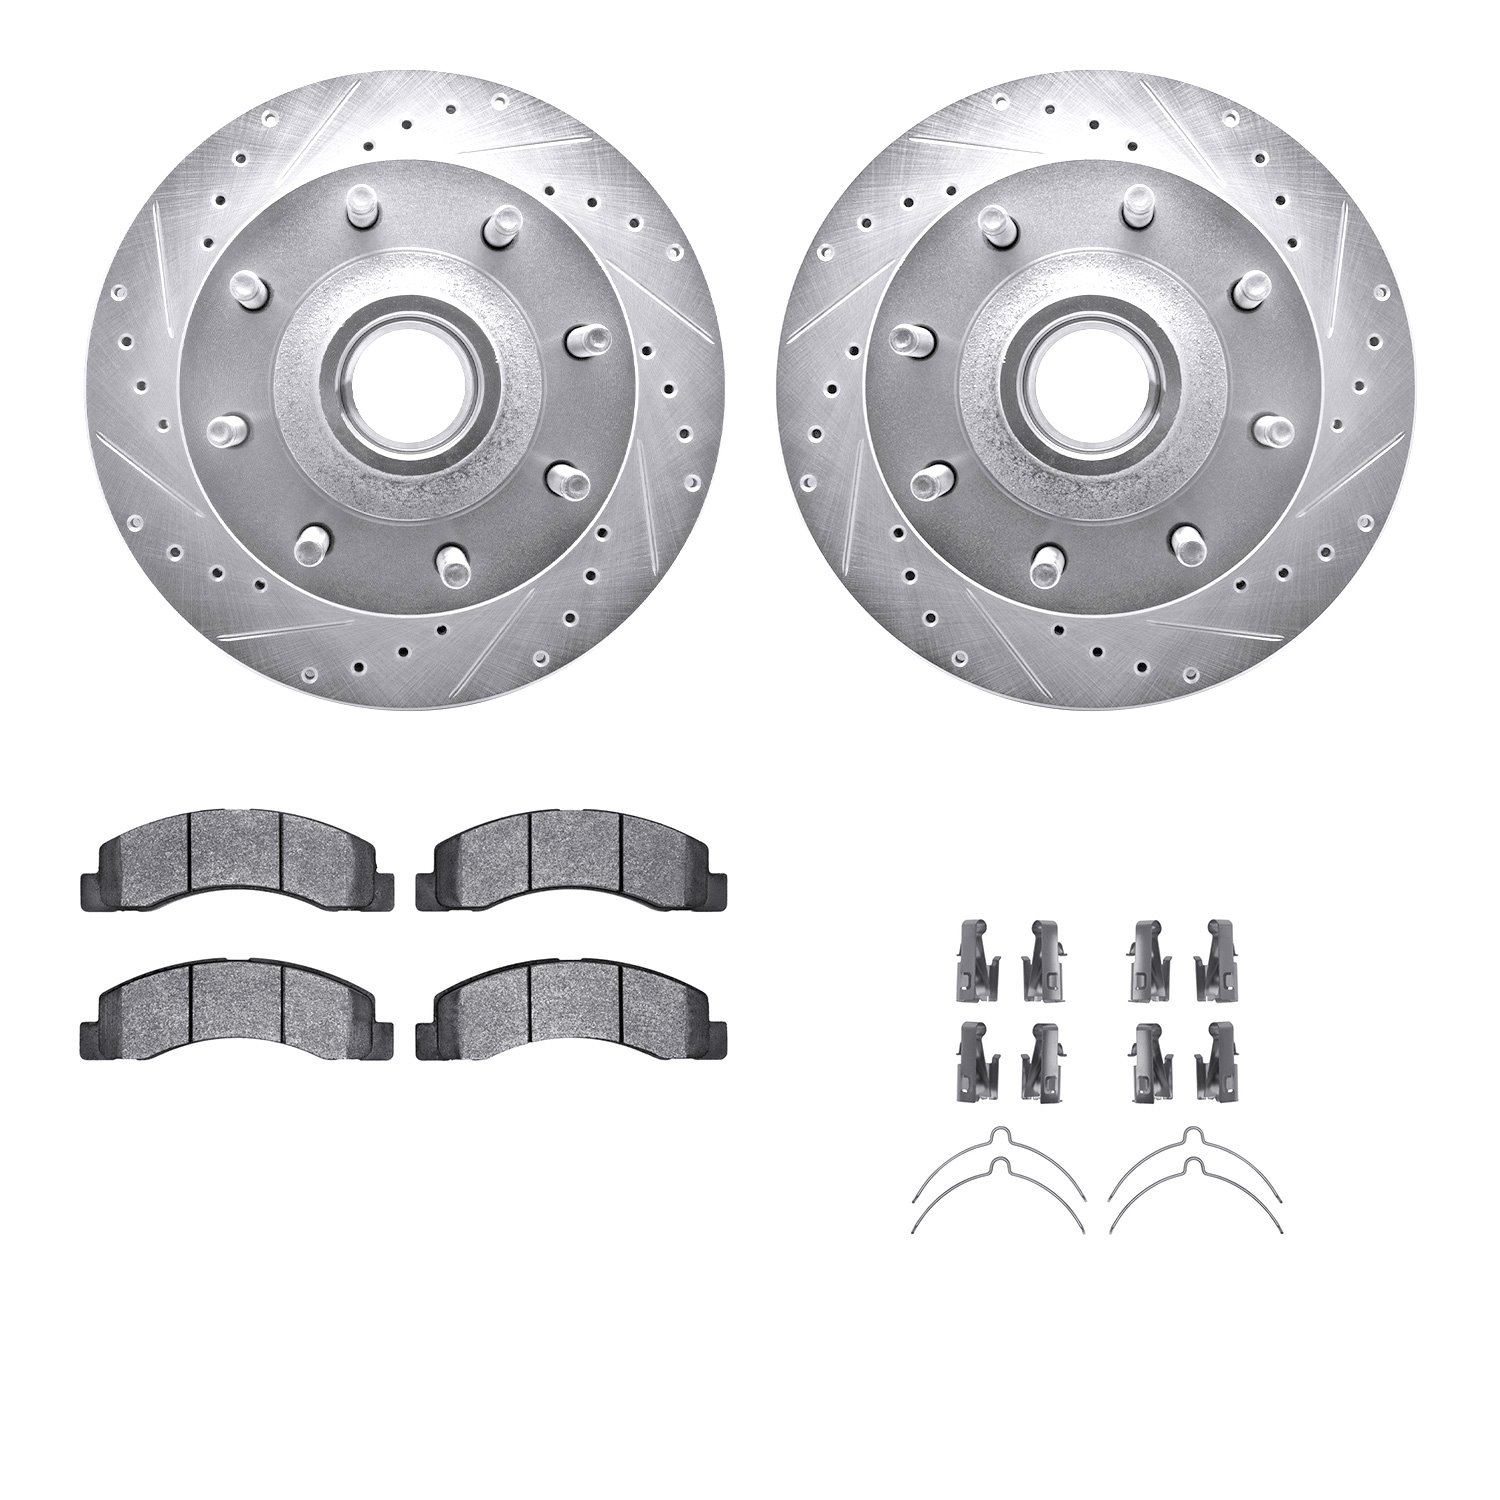 7212-99190 Drilled/Slotted Rotors w/Heavy-Duty Brake Pads Kit & Hardware [Silver], 2003-2005 Ford/Lincoln/Mercury/Mazda, Positio